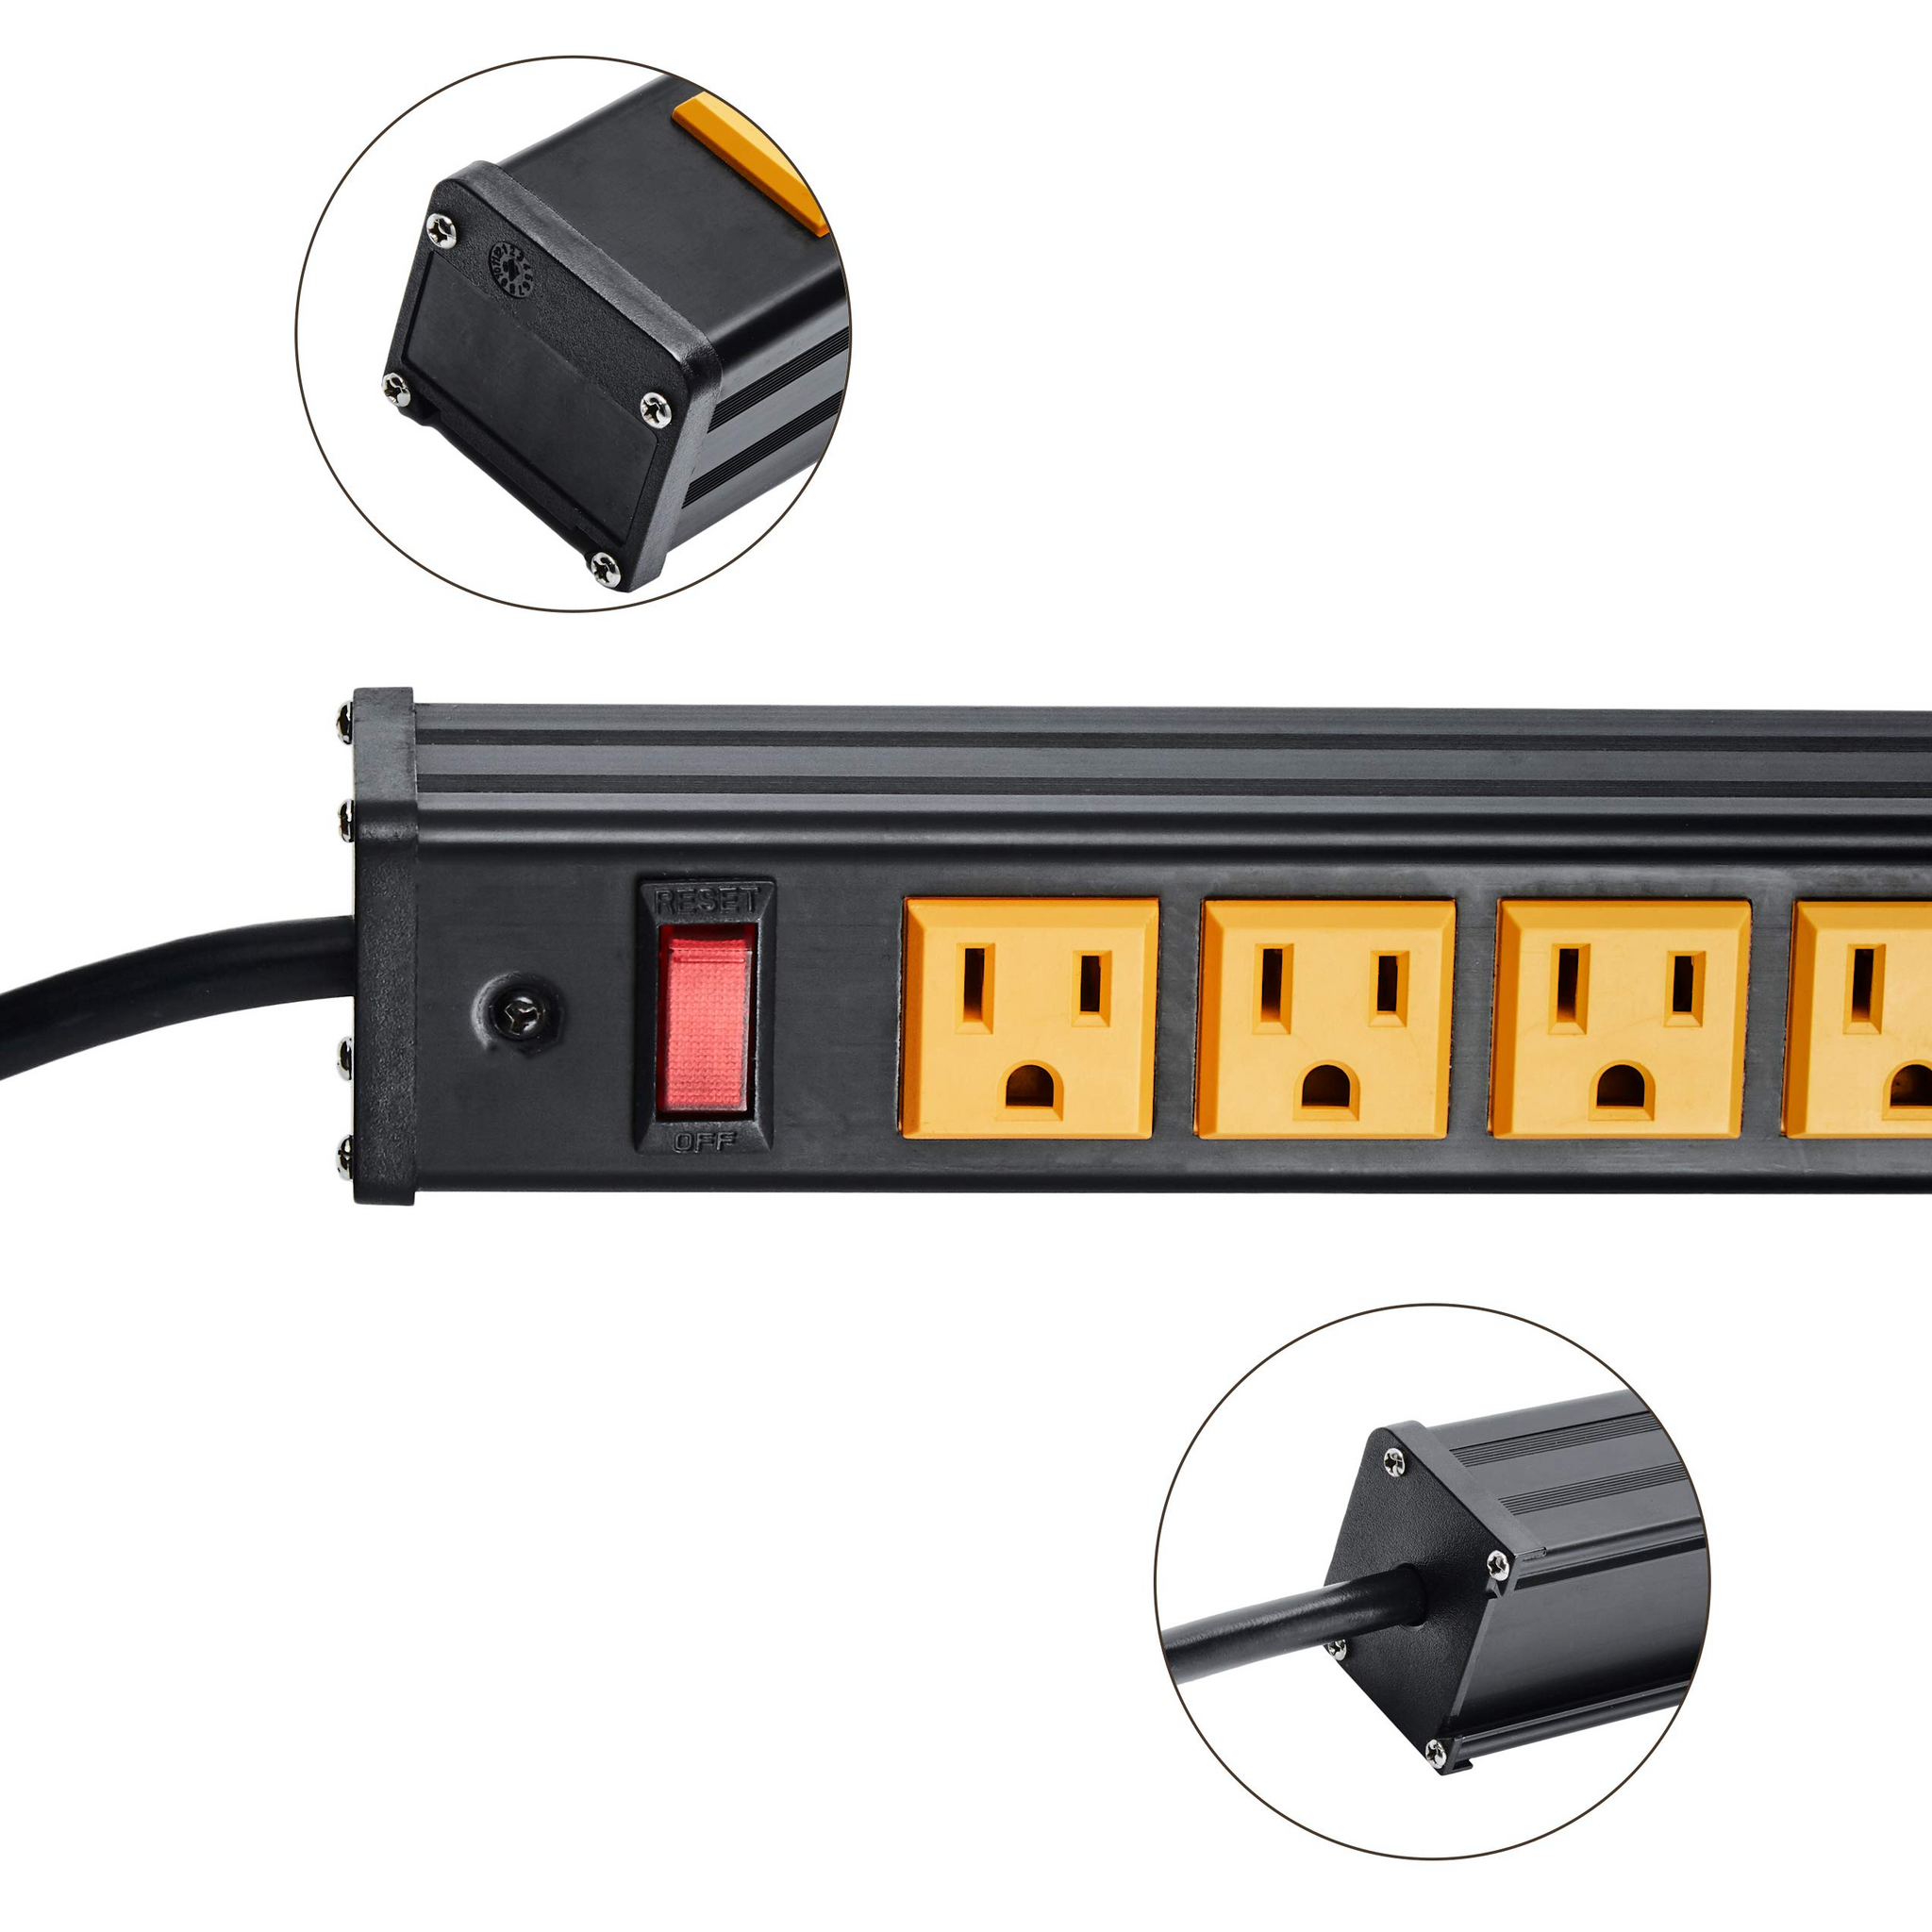 BTU 12 Outlet Heavy Duty Metal Power Strip, Surge Protector Wall